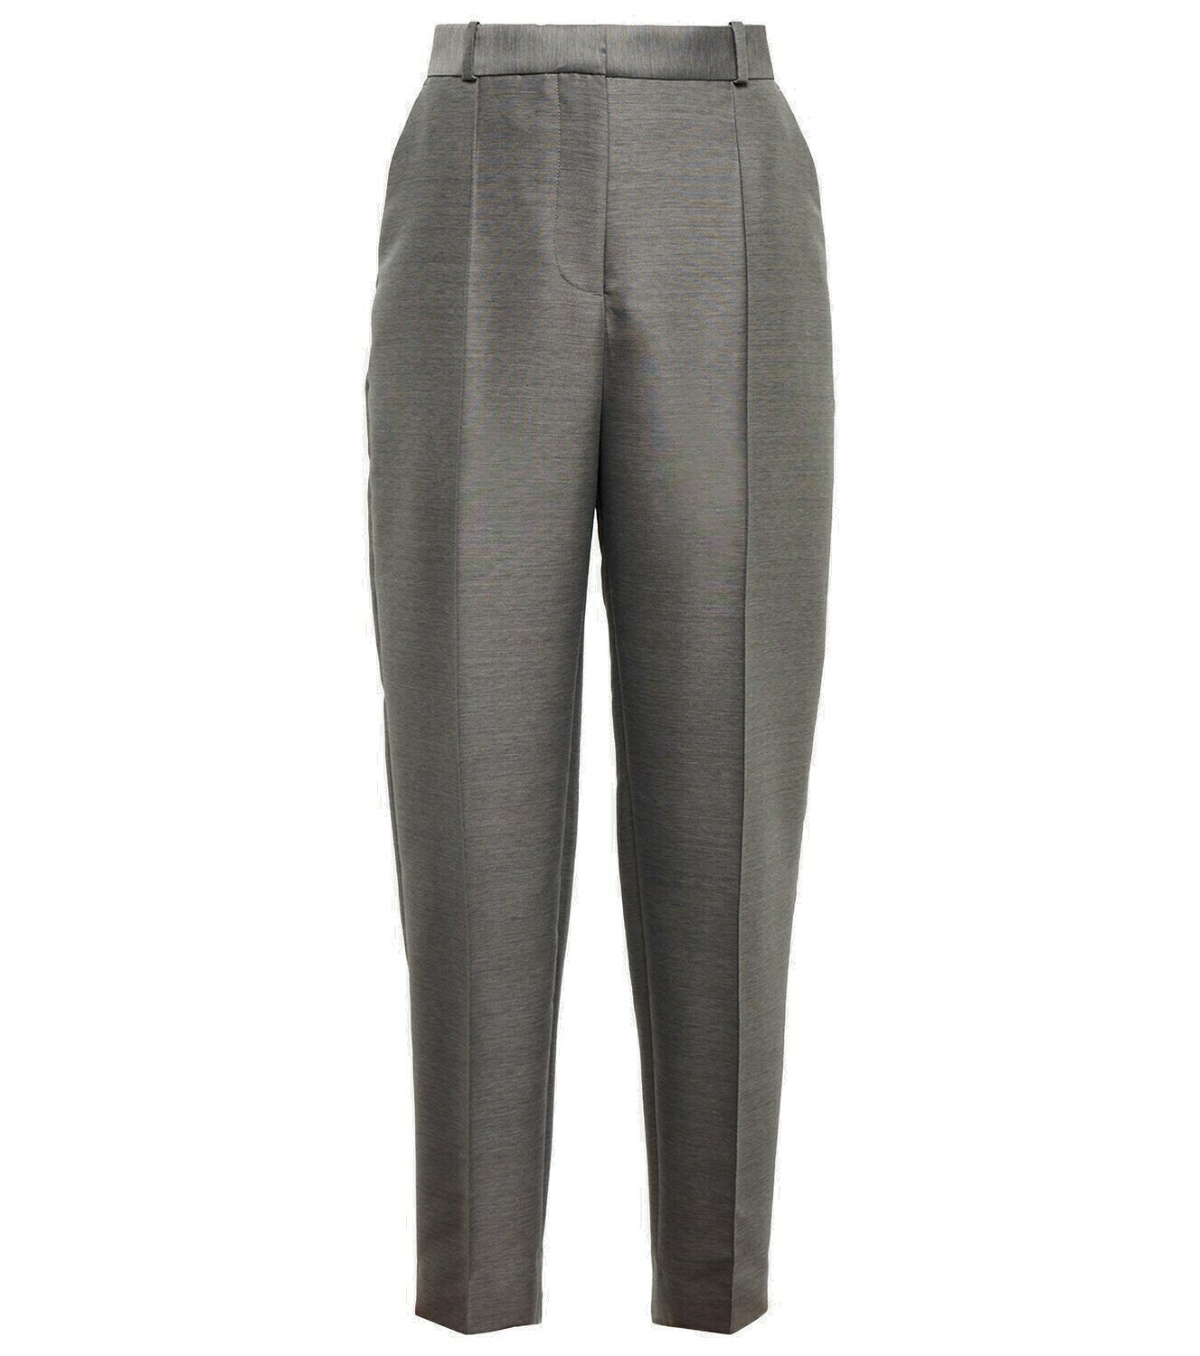 Toteme - Mid-rise straight cotton and wool-blend pants Toteme